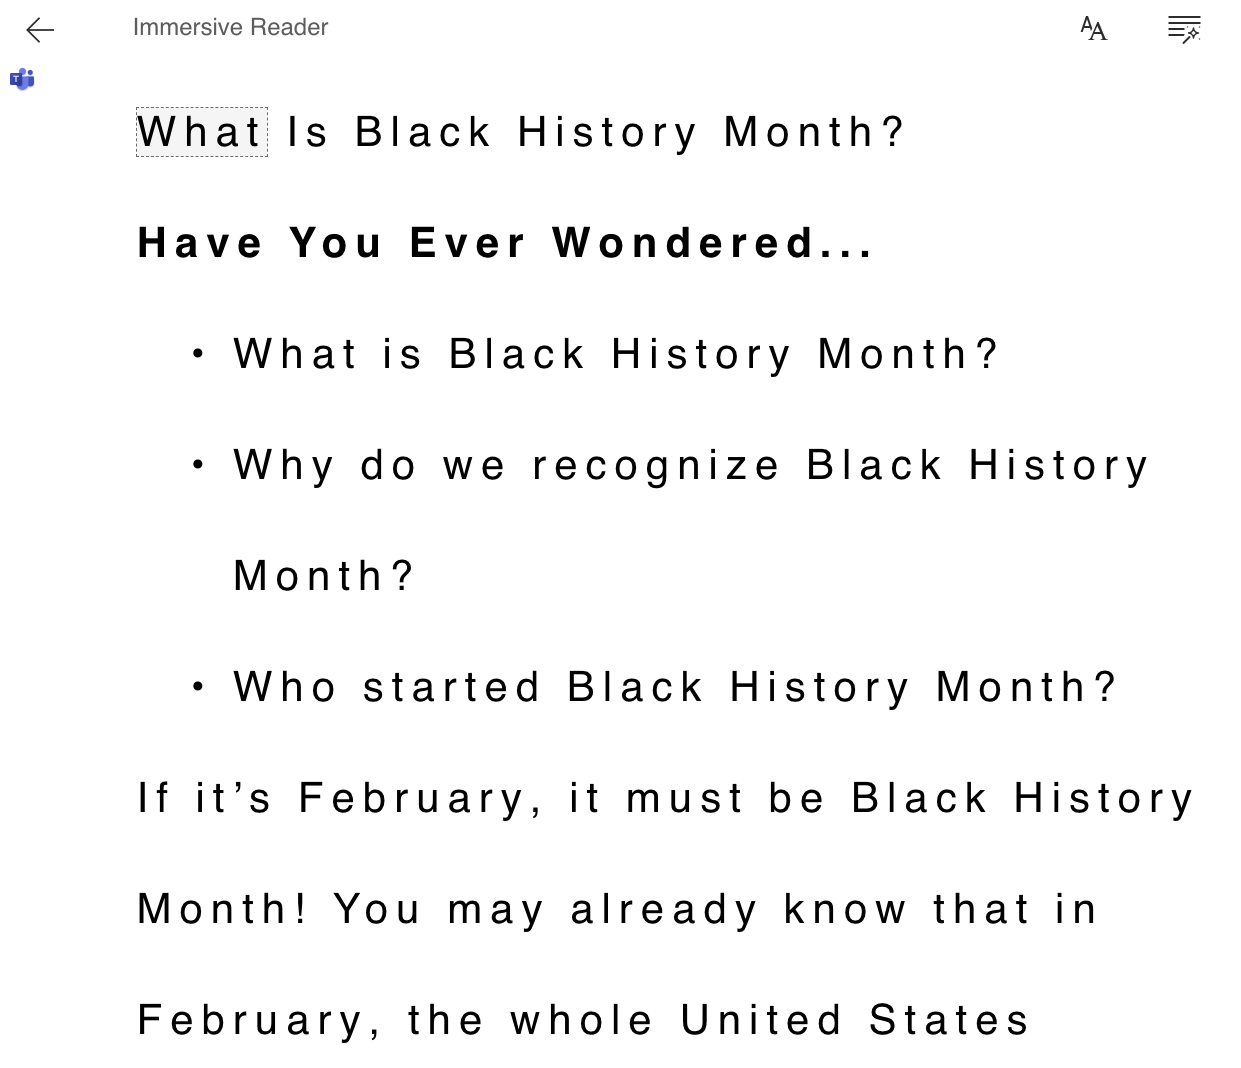 Immersive Reader version of the What Is Black History Month article on Wonderopolis.